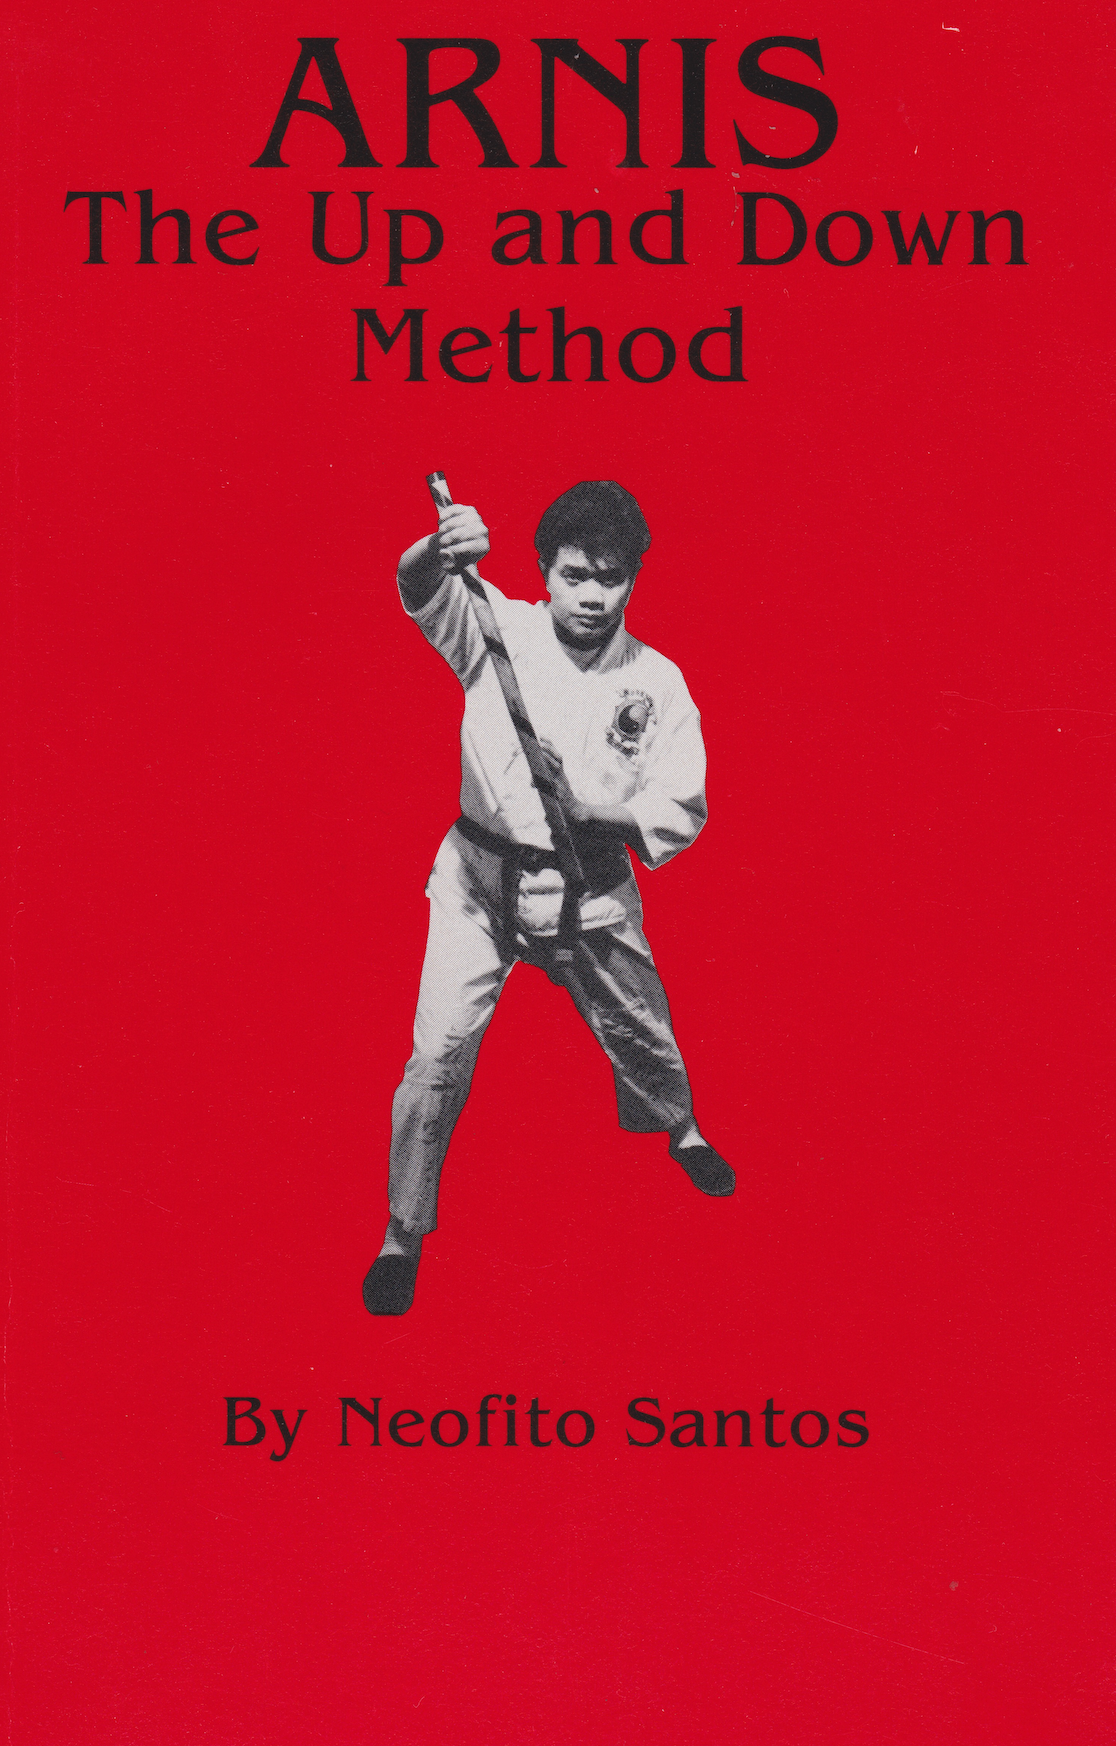 Arnis The Up and Down Method Book by Neofito Santos